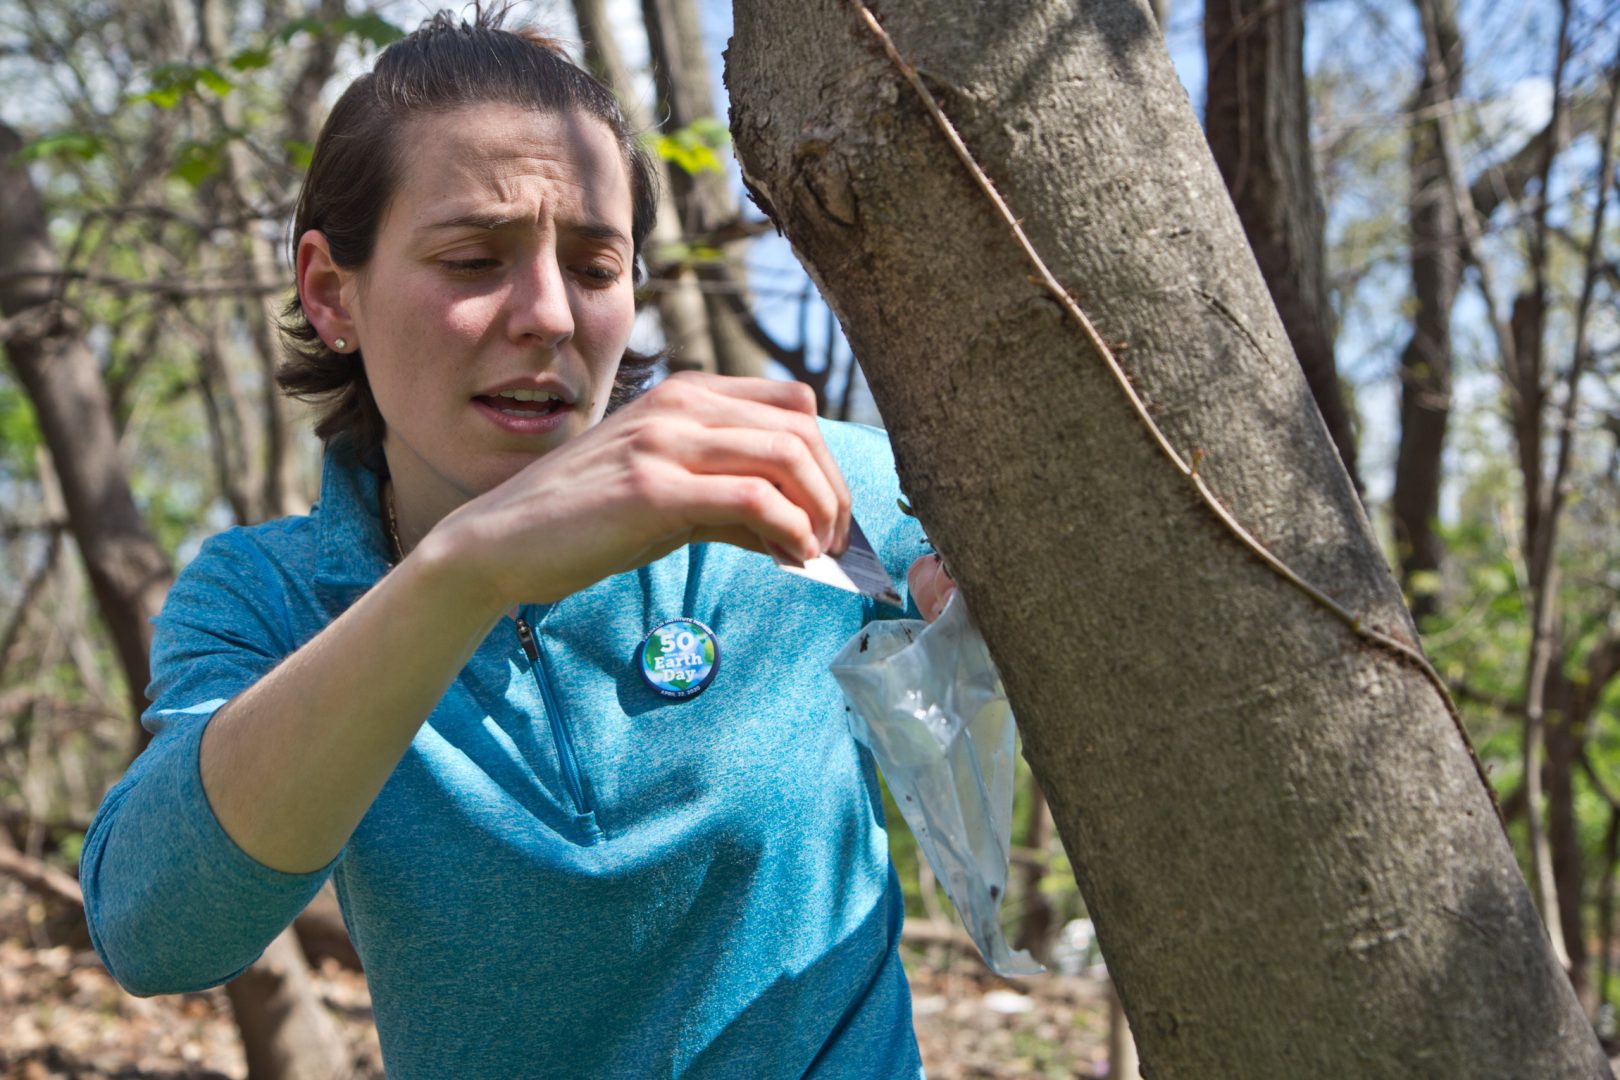 Rachel Valletta, Director of the Climate and Urban Systems Partnership at the Franklin Institute, explains how to scrape spotted lantern fly eggs off of a maple tree in Fairmount Park.